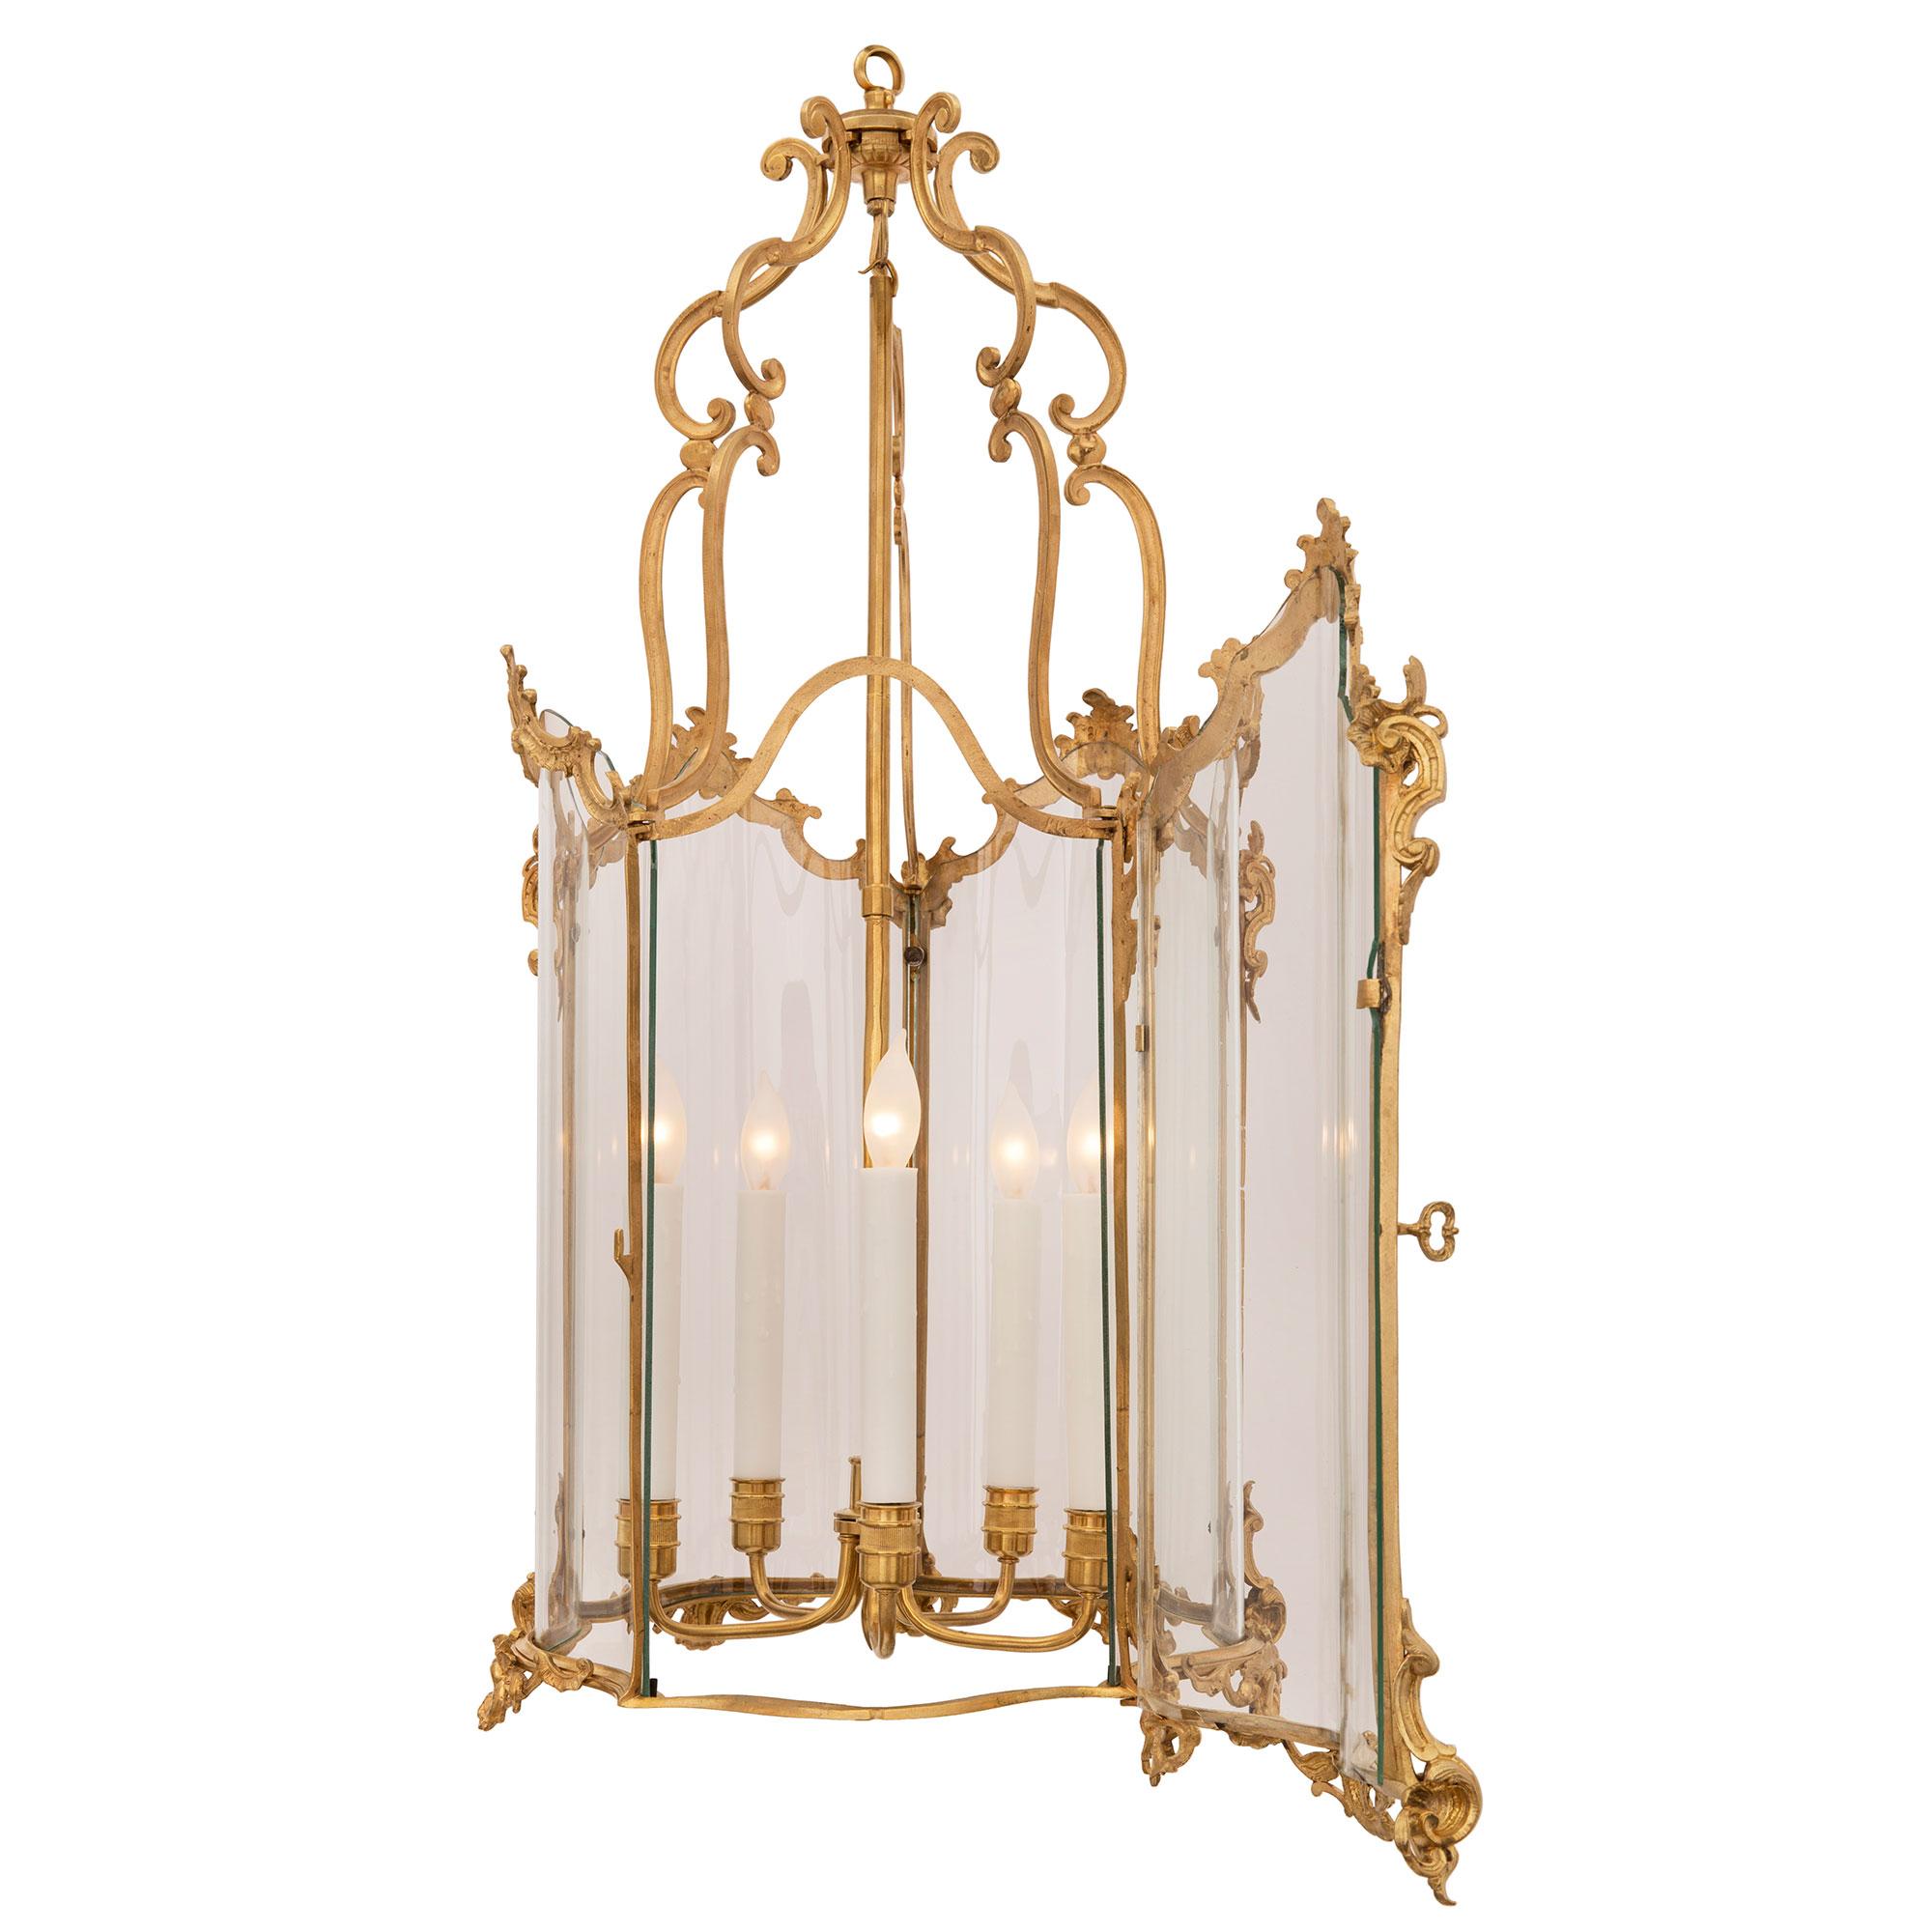 A beautiful French 19th century Louis XV st. ormolu and hand blown glass lantern, stamped 